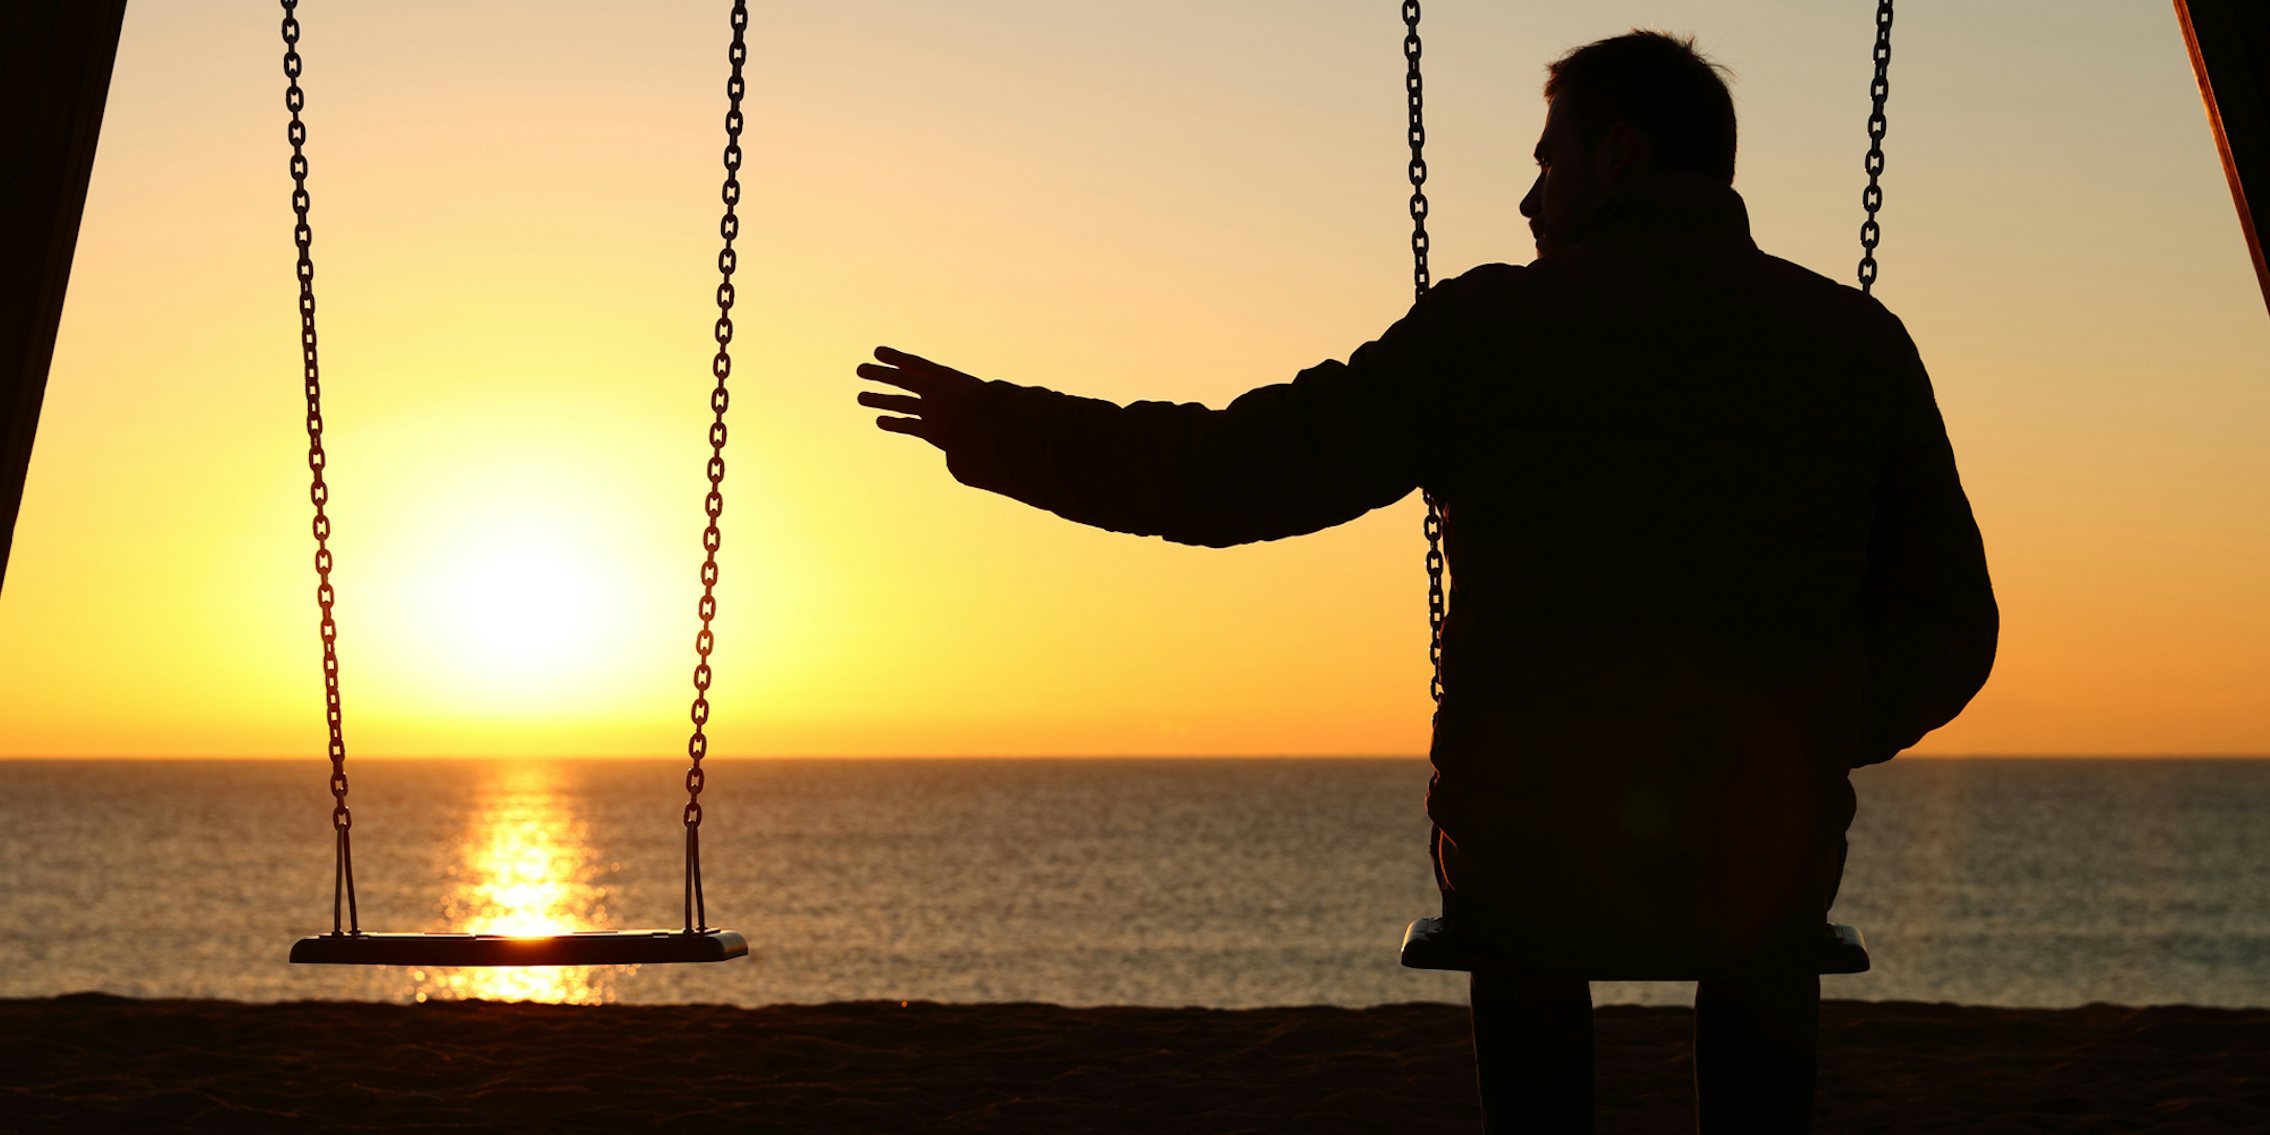 lonely man on swing set reaching arm out to empty seat in front of sunset over water